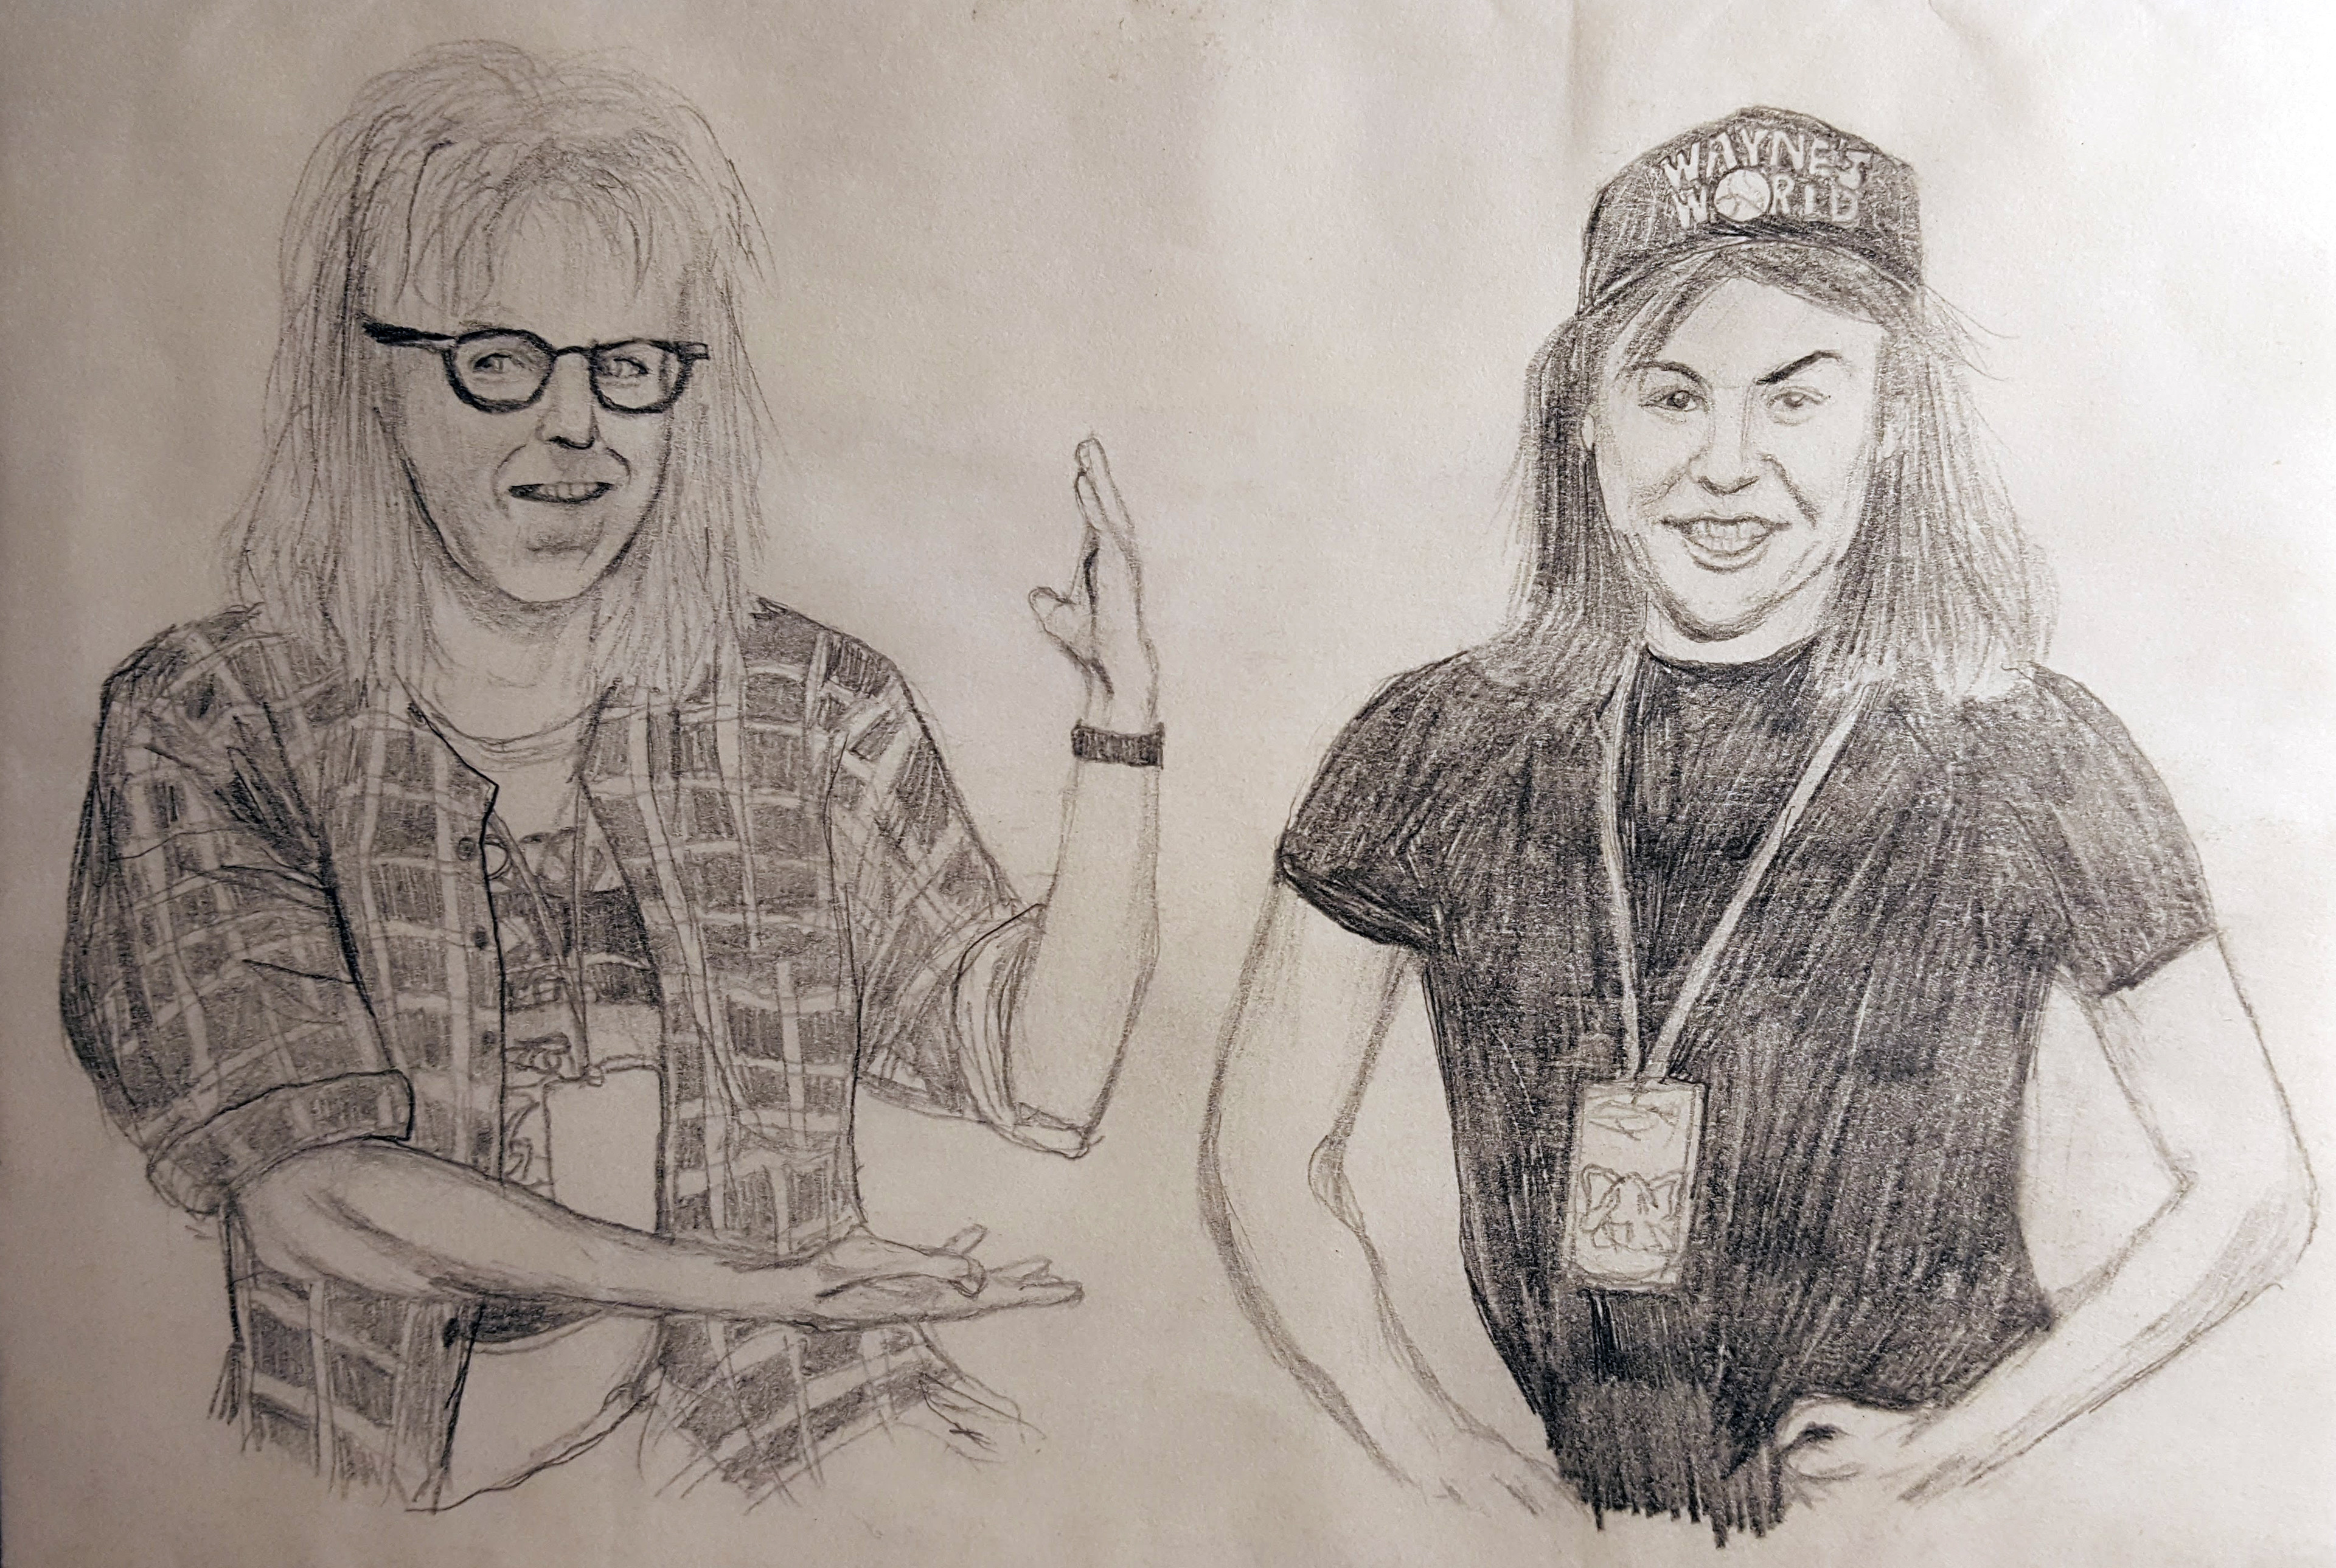 Wayne's World 2! Garth and Wayne, obviously. I remember my mom being unimpressed.